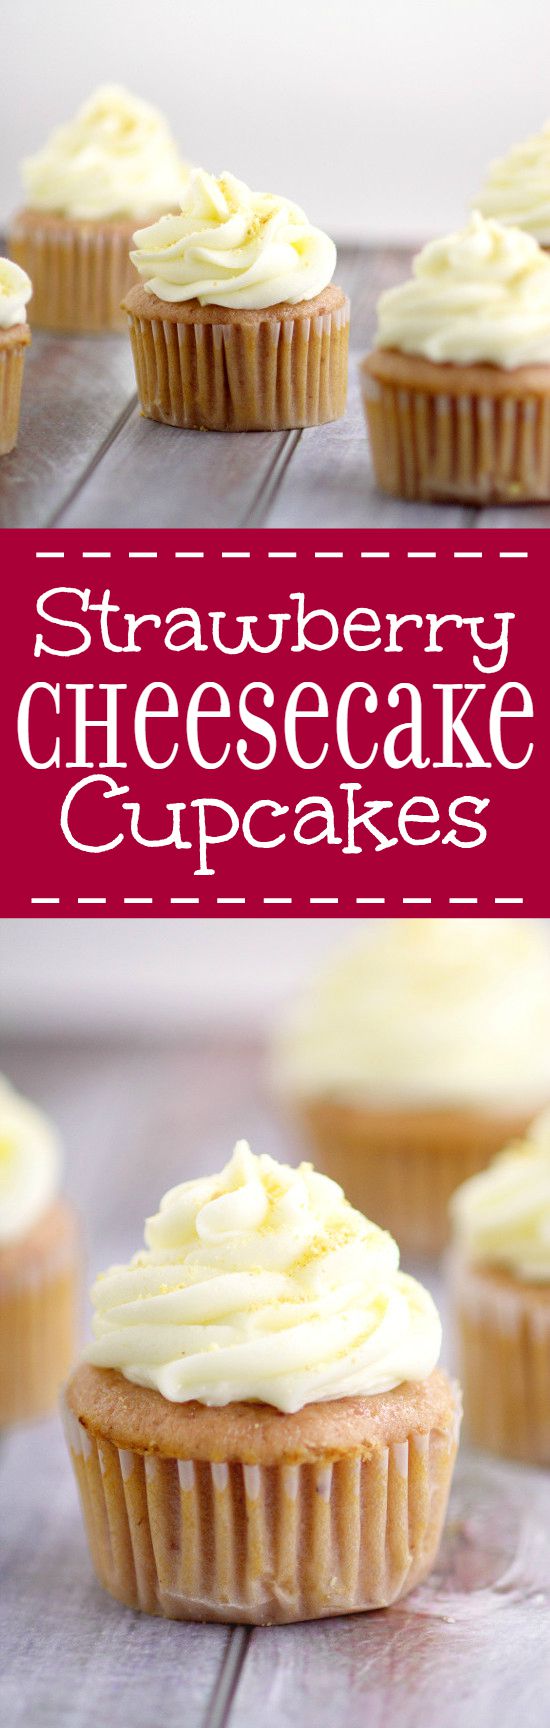 Strawberry Cheesecake Cupcakes have a moist Strawberry cupcakes recipe with cream cheese frosting and graham cracker crumb sprinkles. Fun idea for a birthday! Love that the cupcakes are made from REAL strawberries!